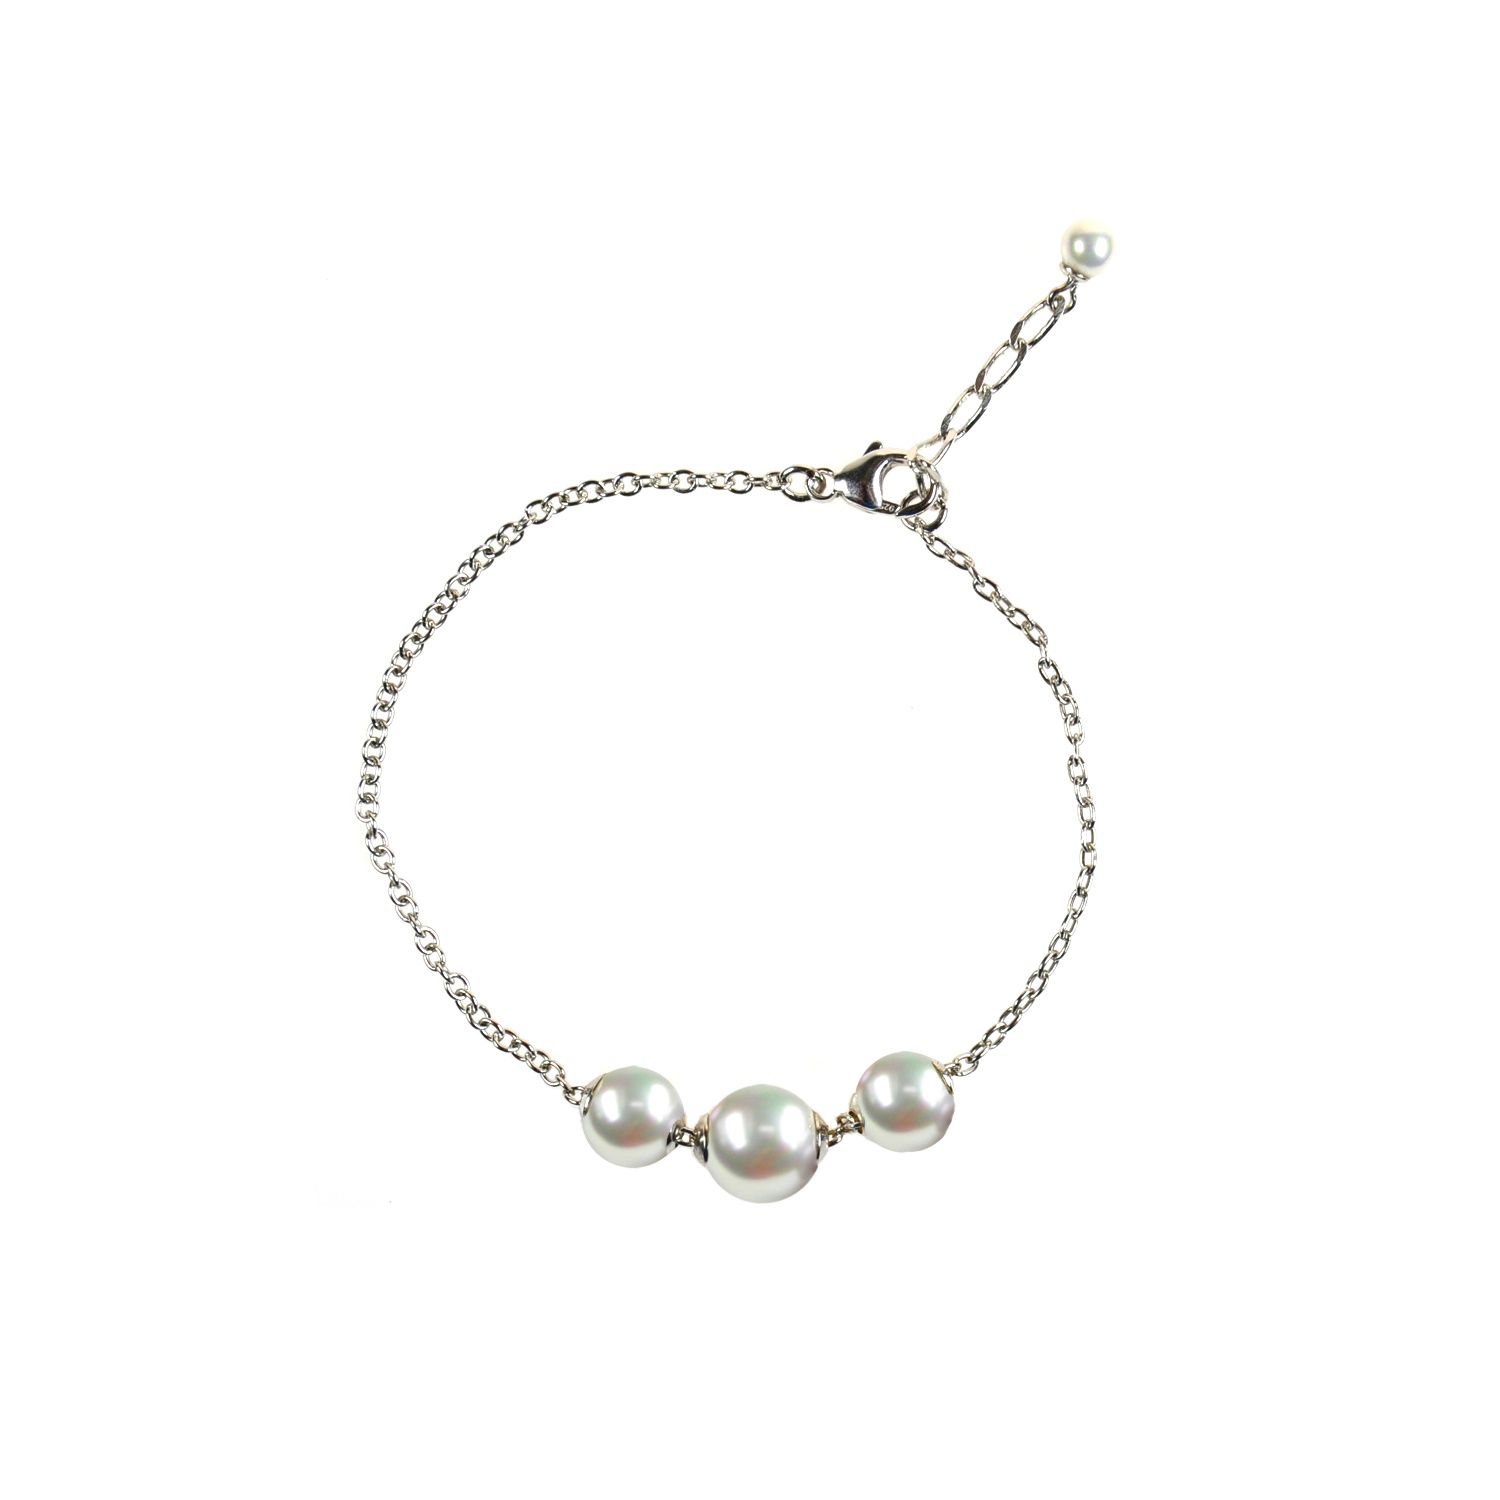 Silver bracelet with white pearls